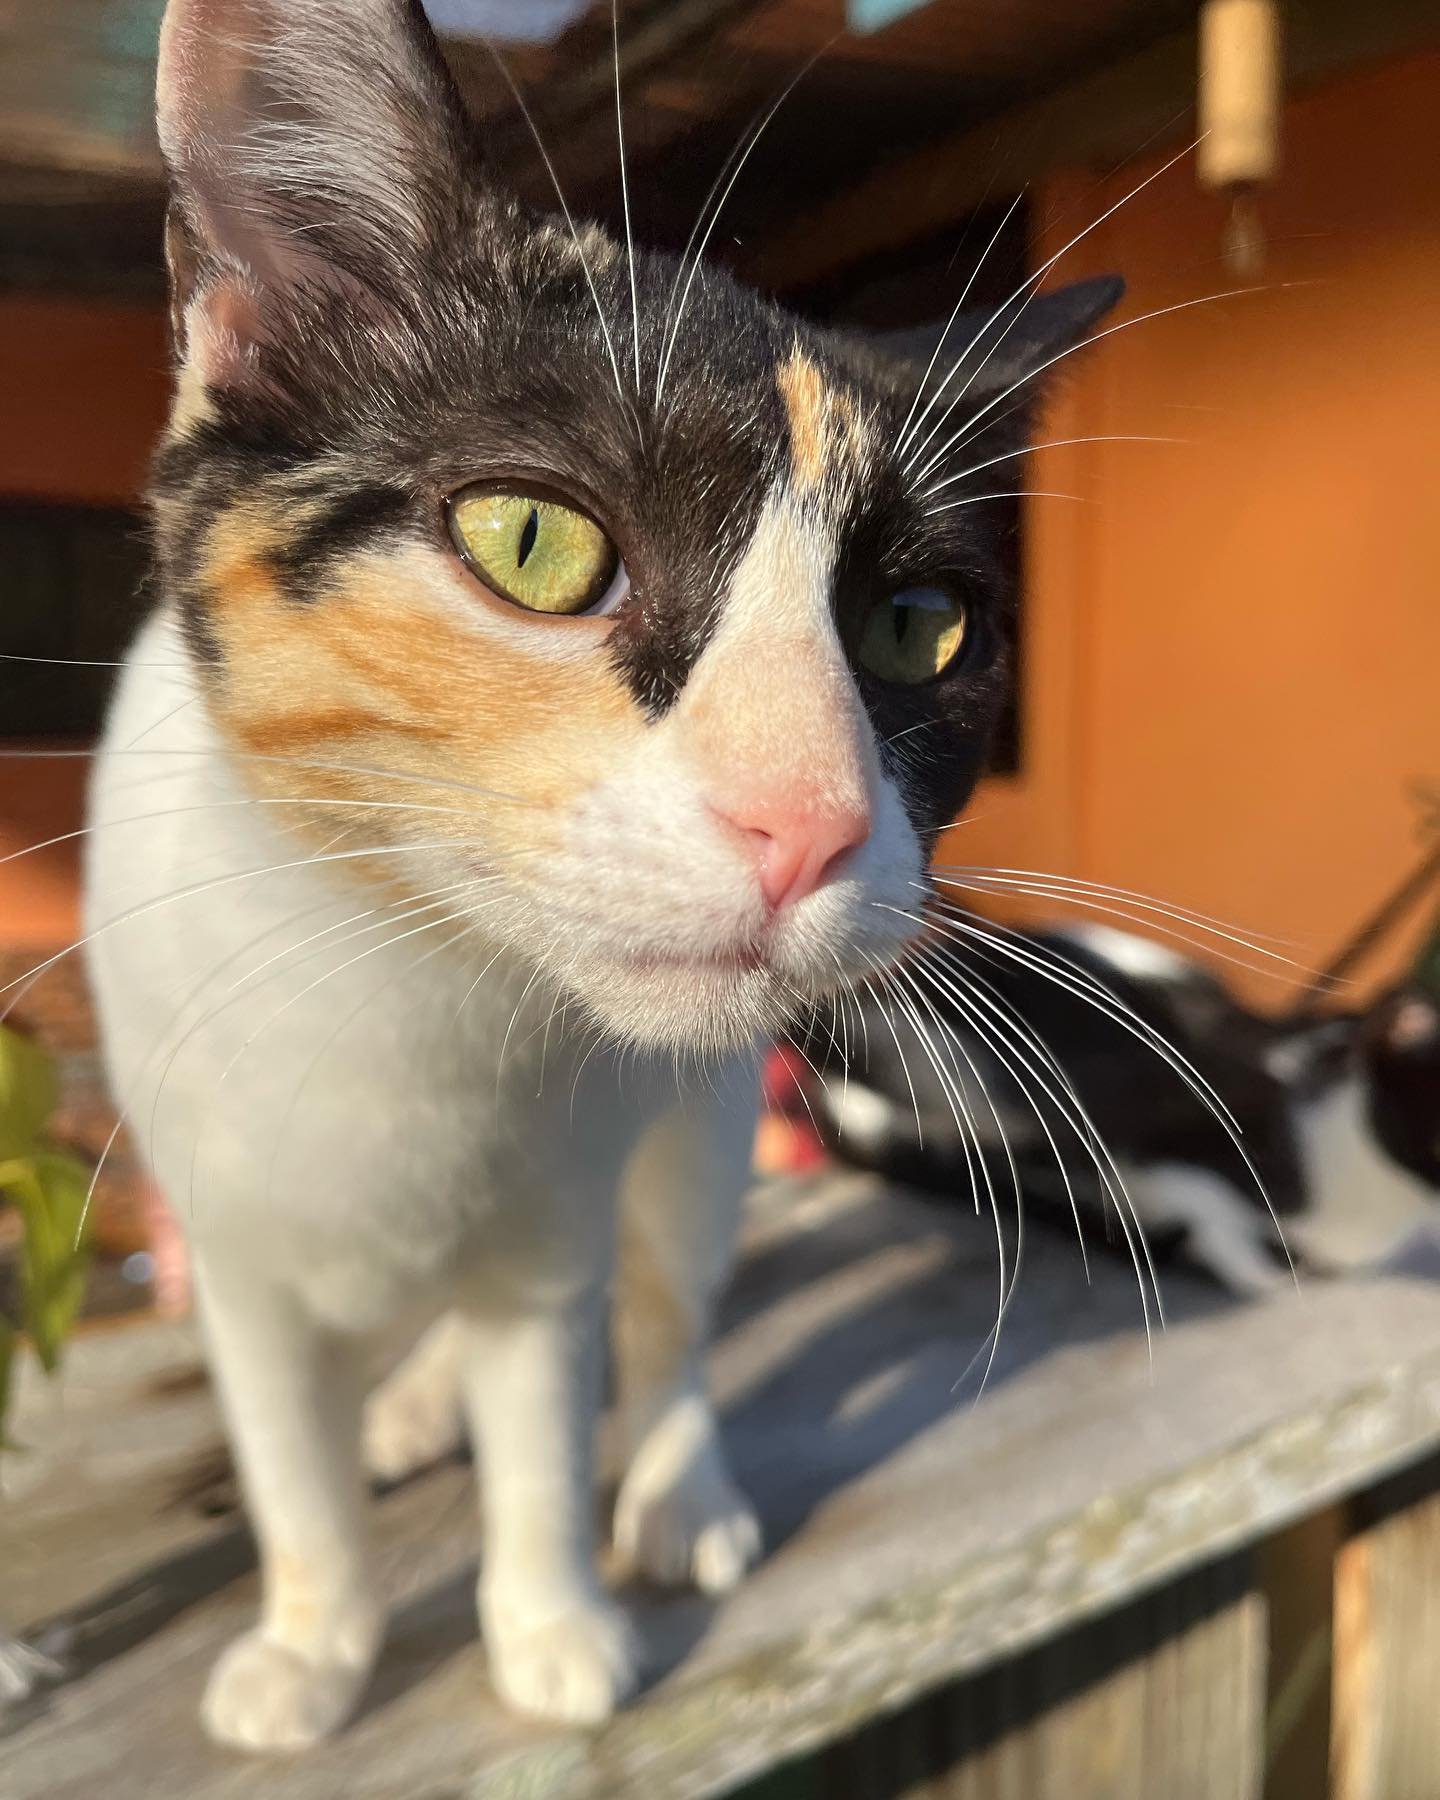 Meet Luna Margretson 

She&rsquo;s a wild Tica cat who delightfully chooses to live at our house&hellip; possibly because we feed her, snuggle her and often splurge for tuna to keep her fur soft. 

She is the reason all my earbud sets only have one b